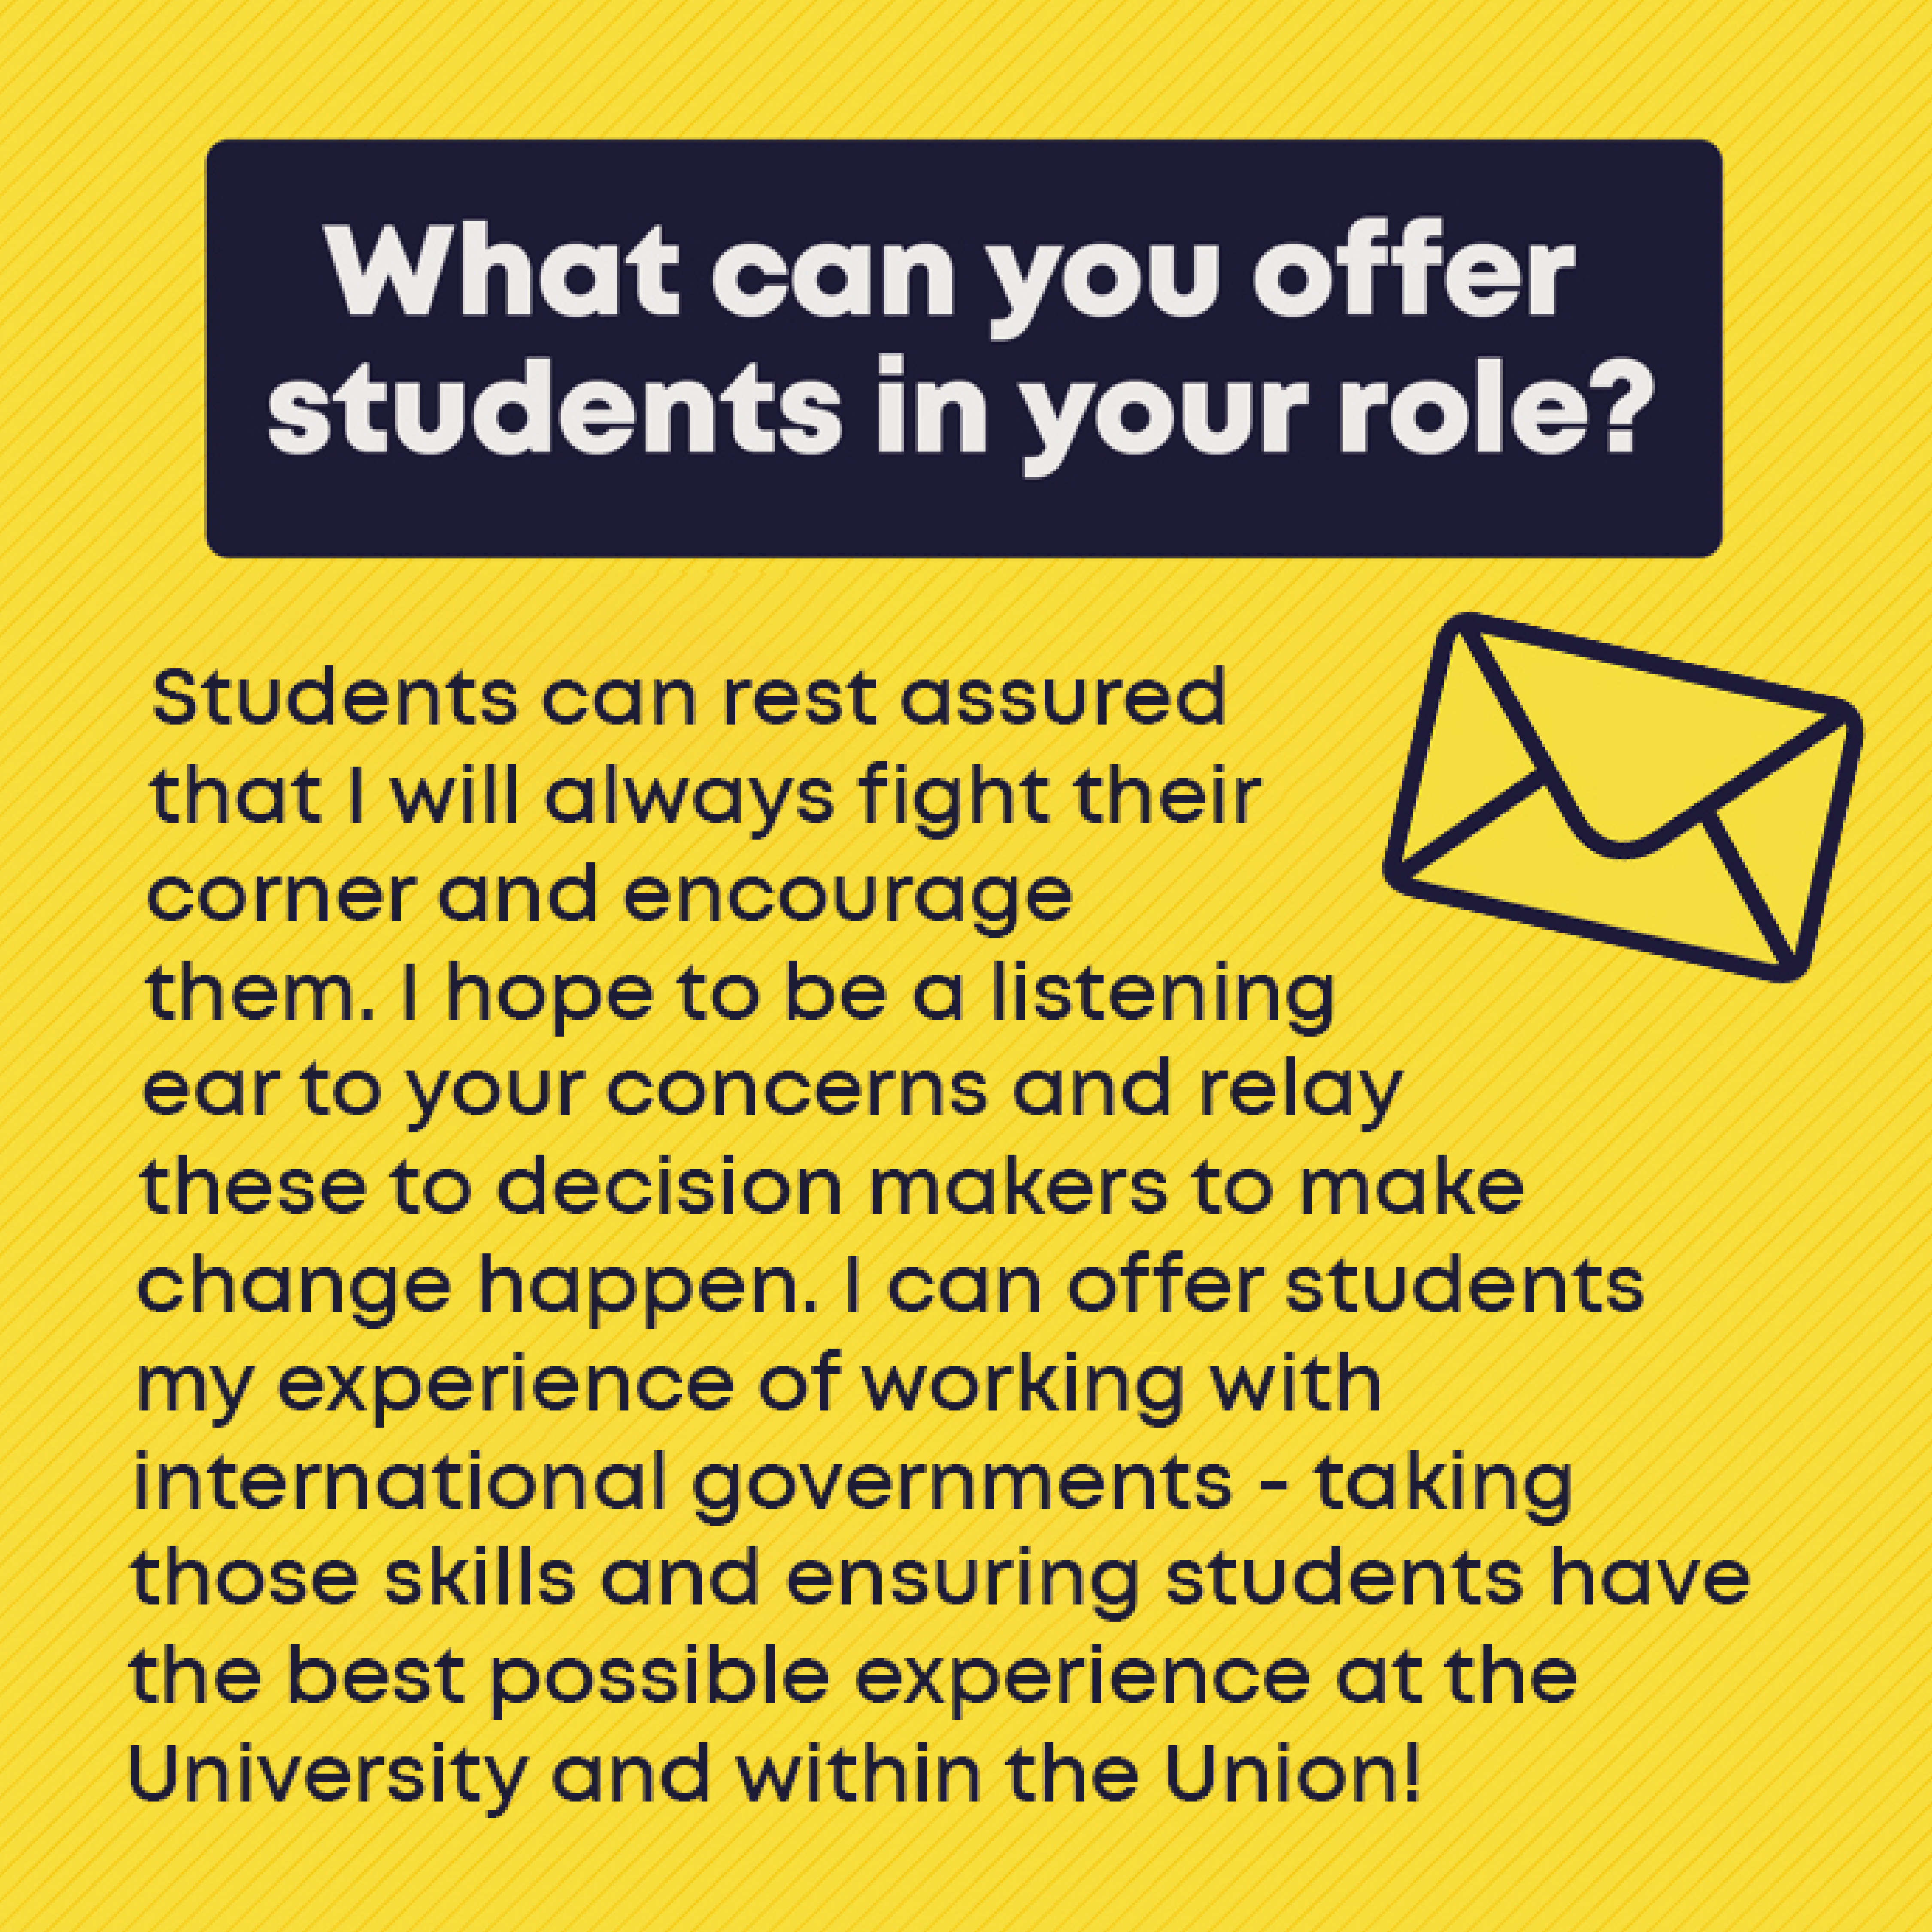 What can you offer students in your role? Students can rest assured that I will always fight their corner and encourage them. I hope to be a listening ear to your concerns and relay these to decision makers to make change happen. I can offer students my experience of working with international governments - taking those skills and ensuring students have the best possible experience at the University and within the Union! 